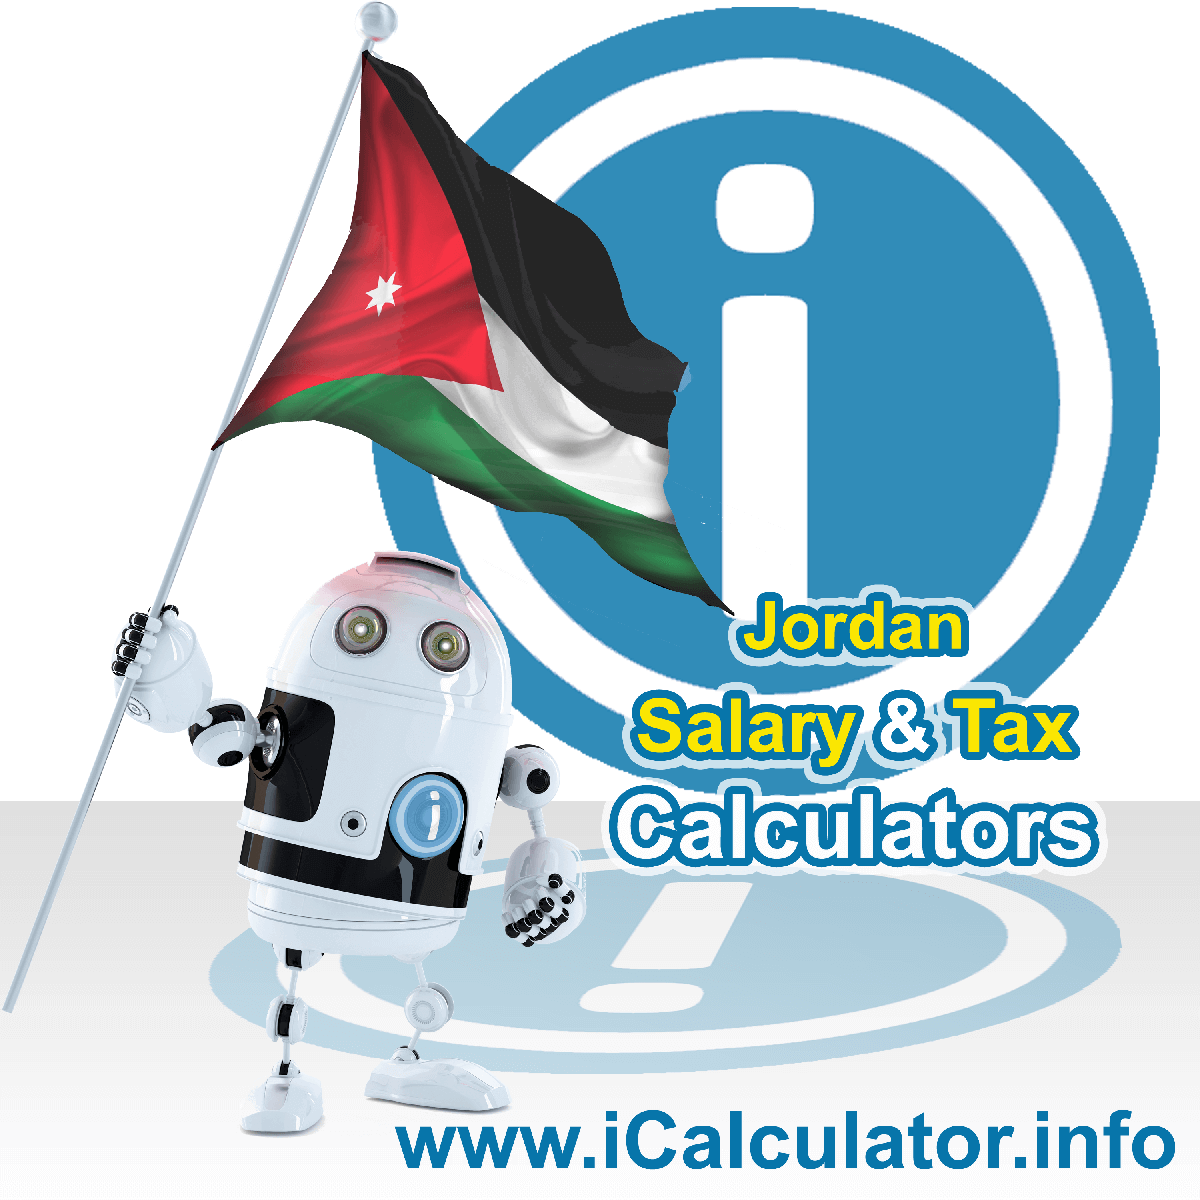 Jordan Salary Calculator. This image shows the Jordanese flag and information relating to the tax formula for the Jordan Tax Calculator